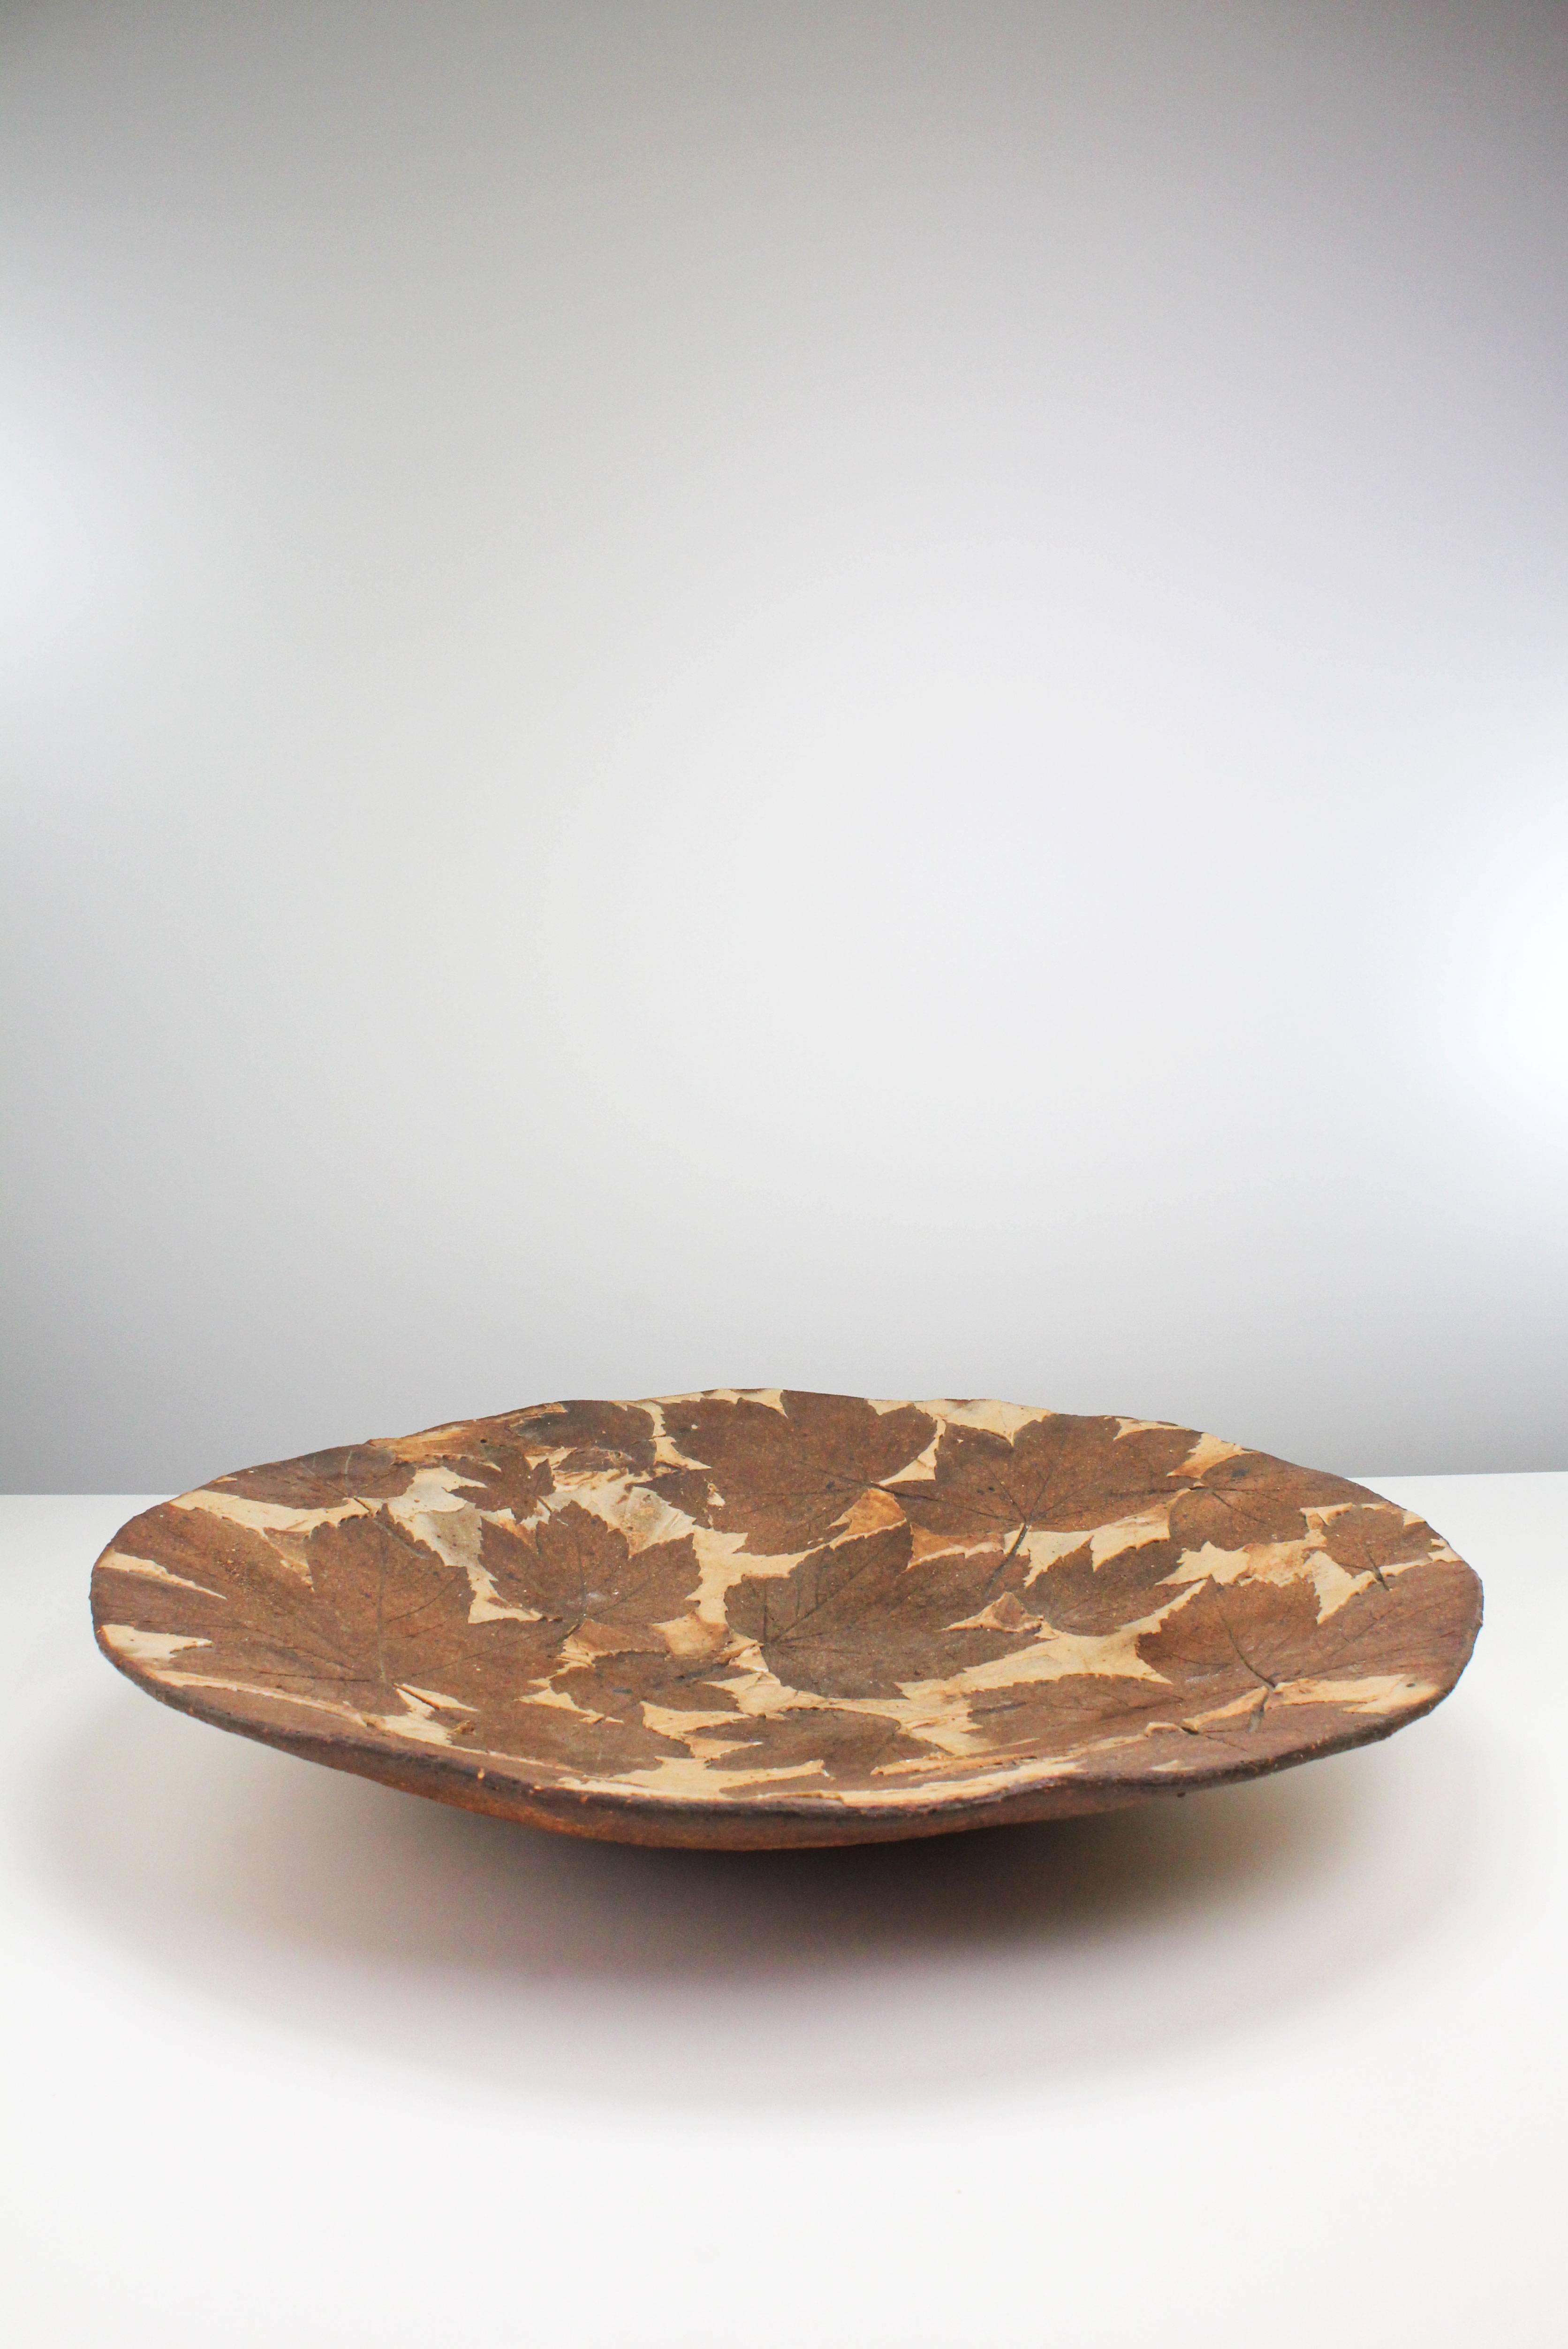 One of a kind, handmade and hand decorated centerpiece or wall decoration by experimental Danish artist Bodil Marie Nielsen. Imprints of actual leaves and stems are made into the ceramic material in natural brown colors. Artist's name and 